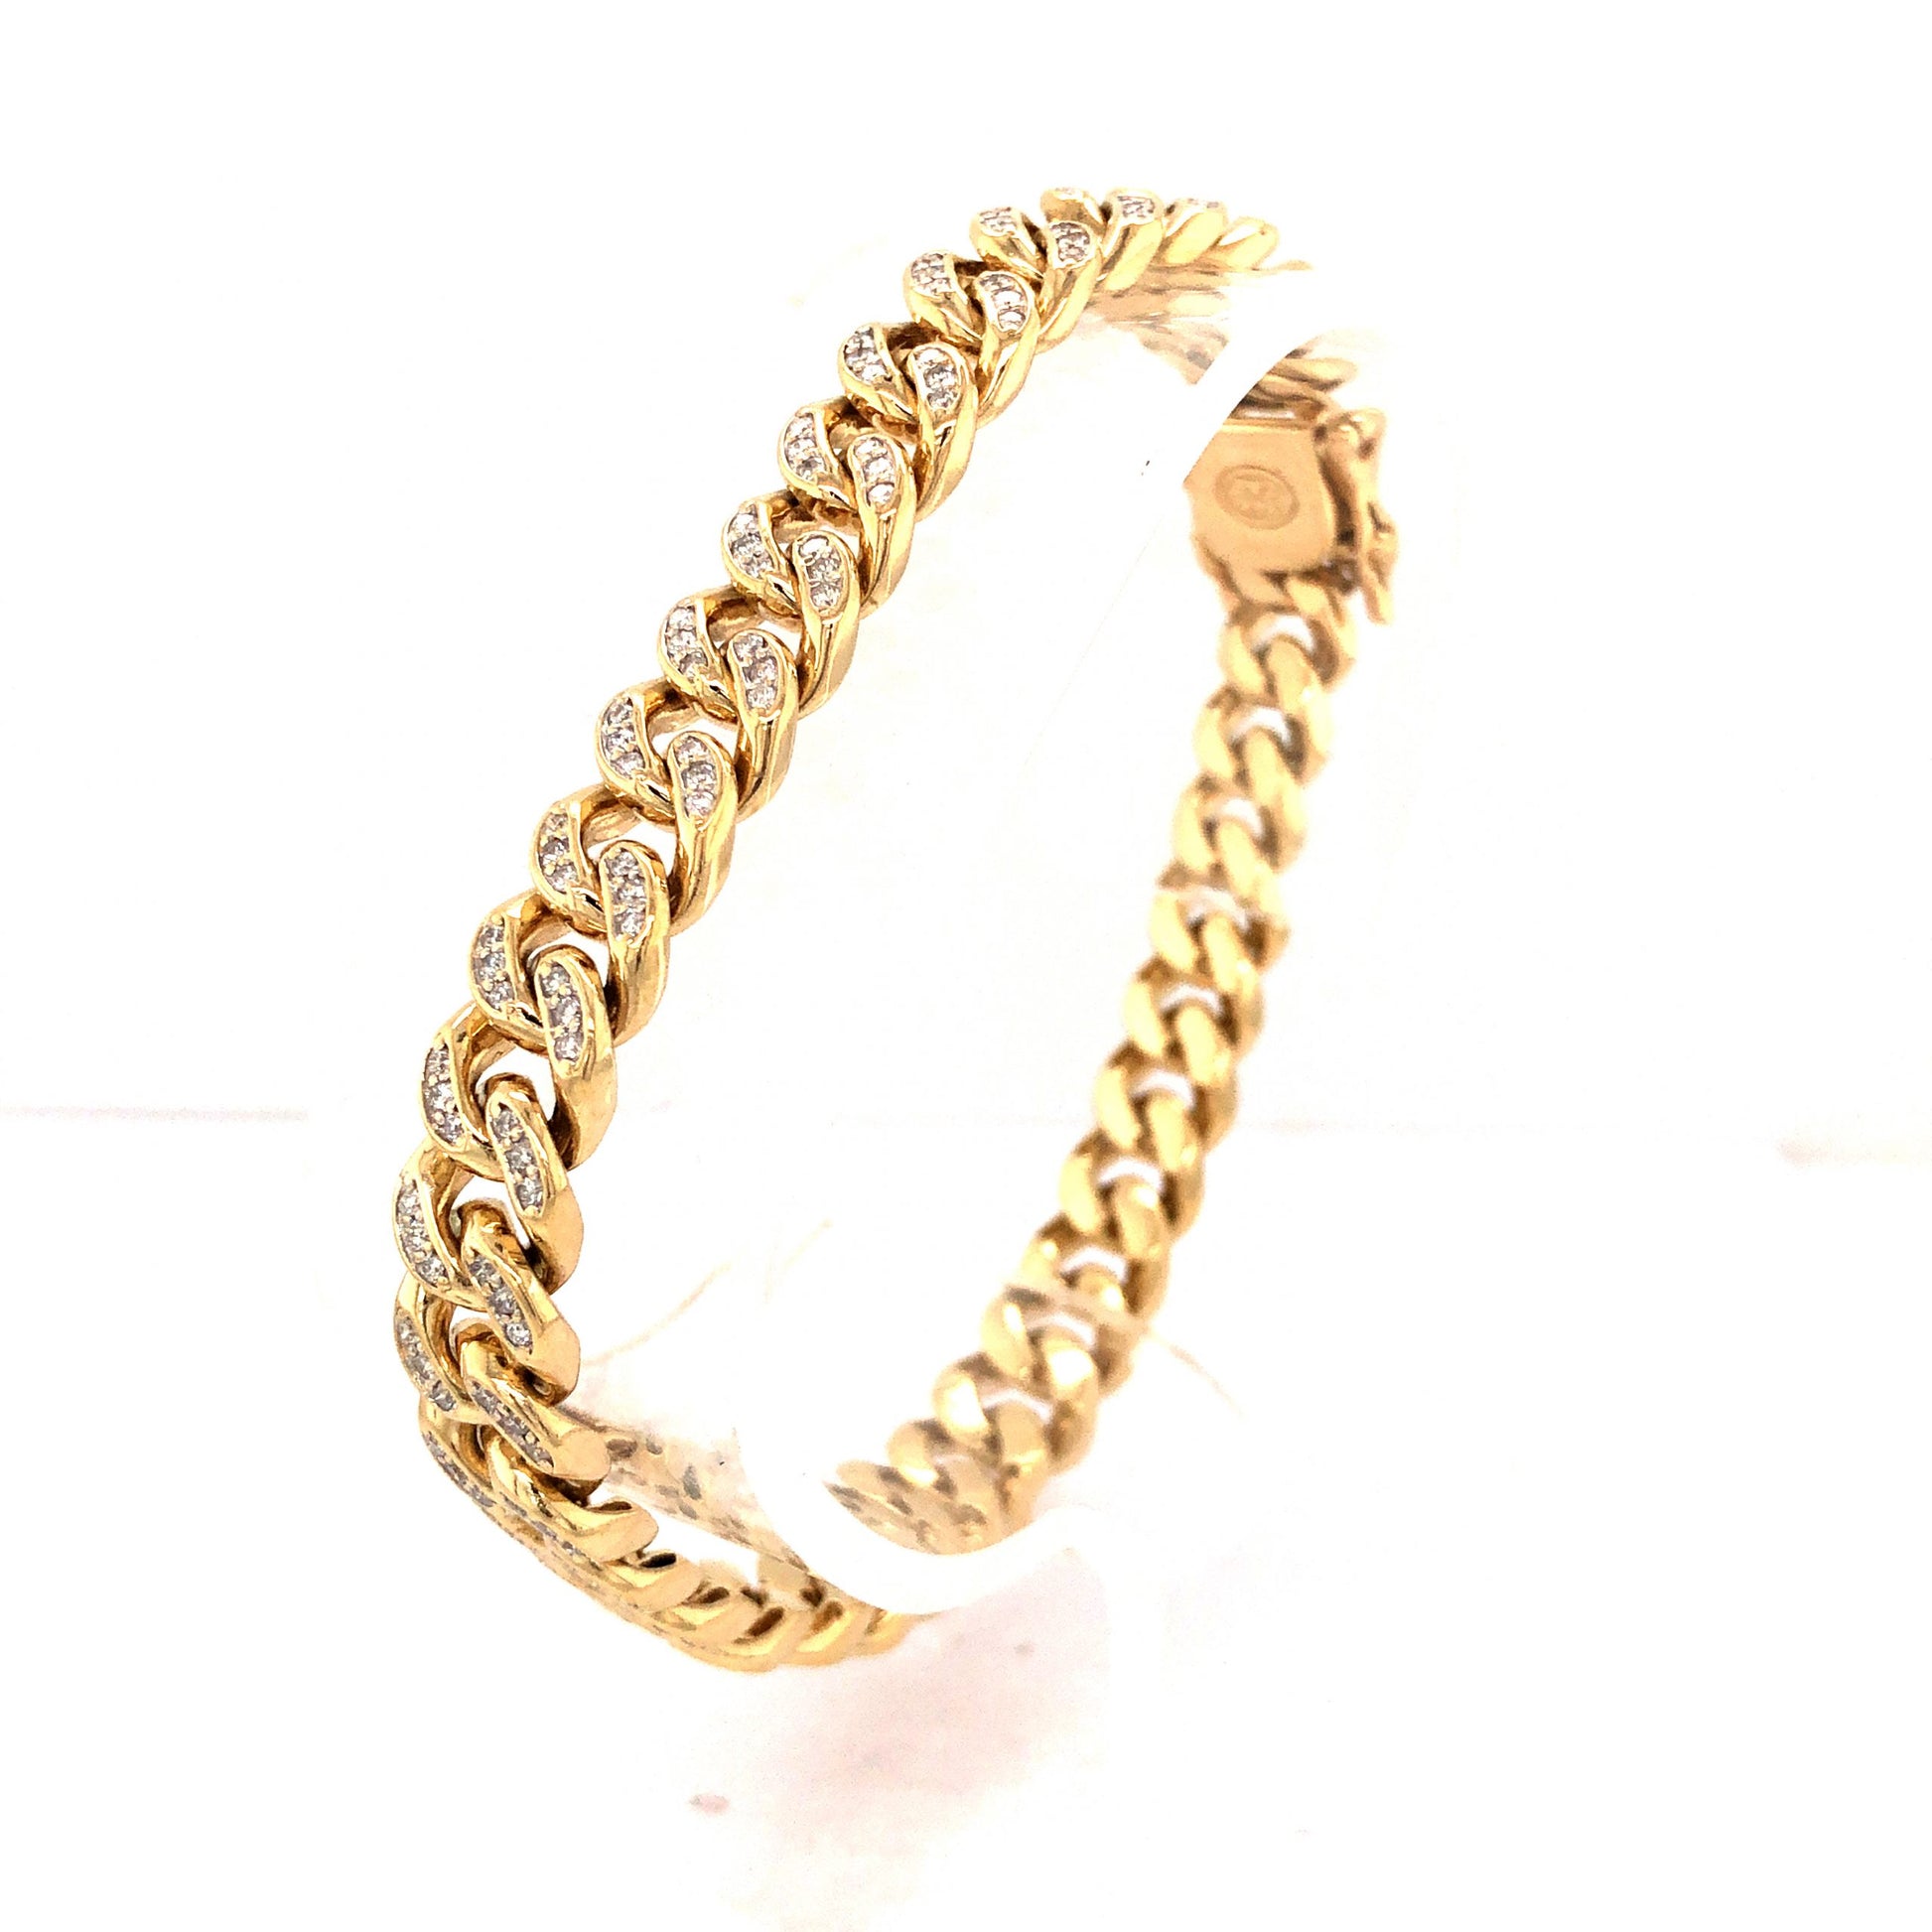 Pave Diamond Chain Link Bracelet in 14k Yellow GoldComposition: PlatinumTotal Diamond Weight: 2.16 ctTotal Gram Weight: 39.4 gInscription: 14k CAL